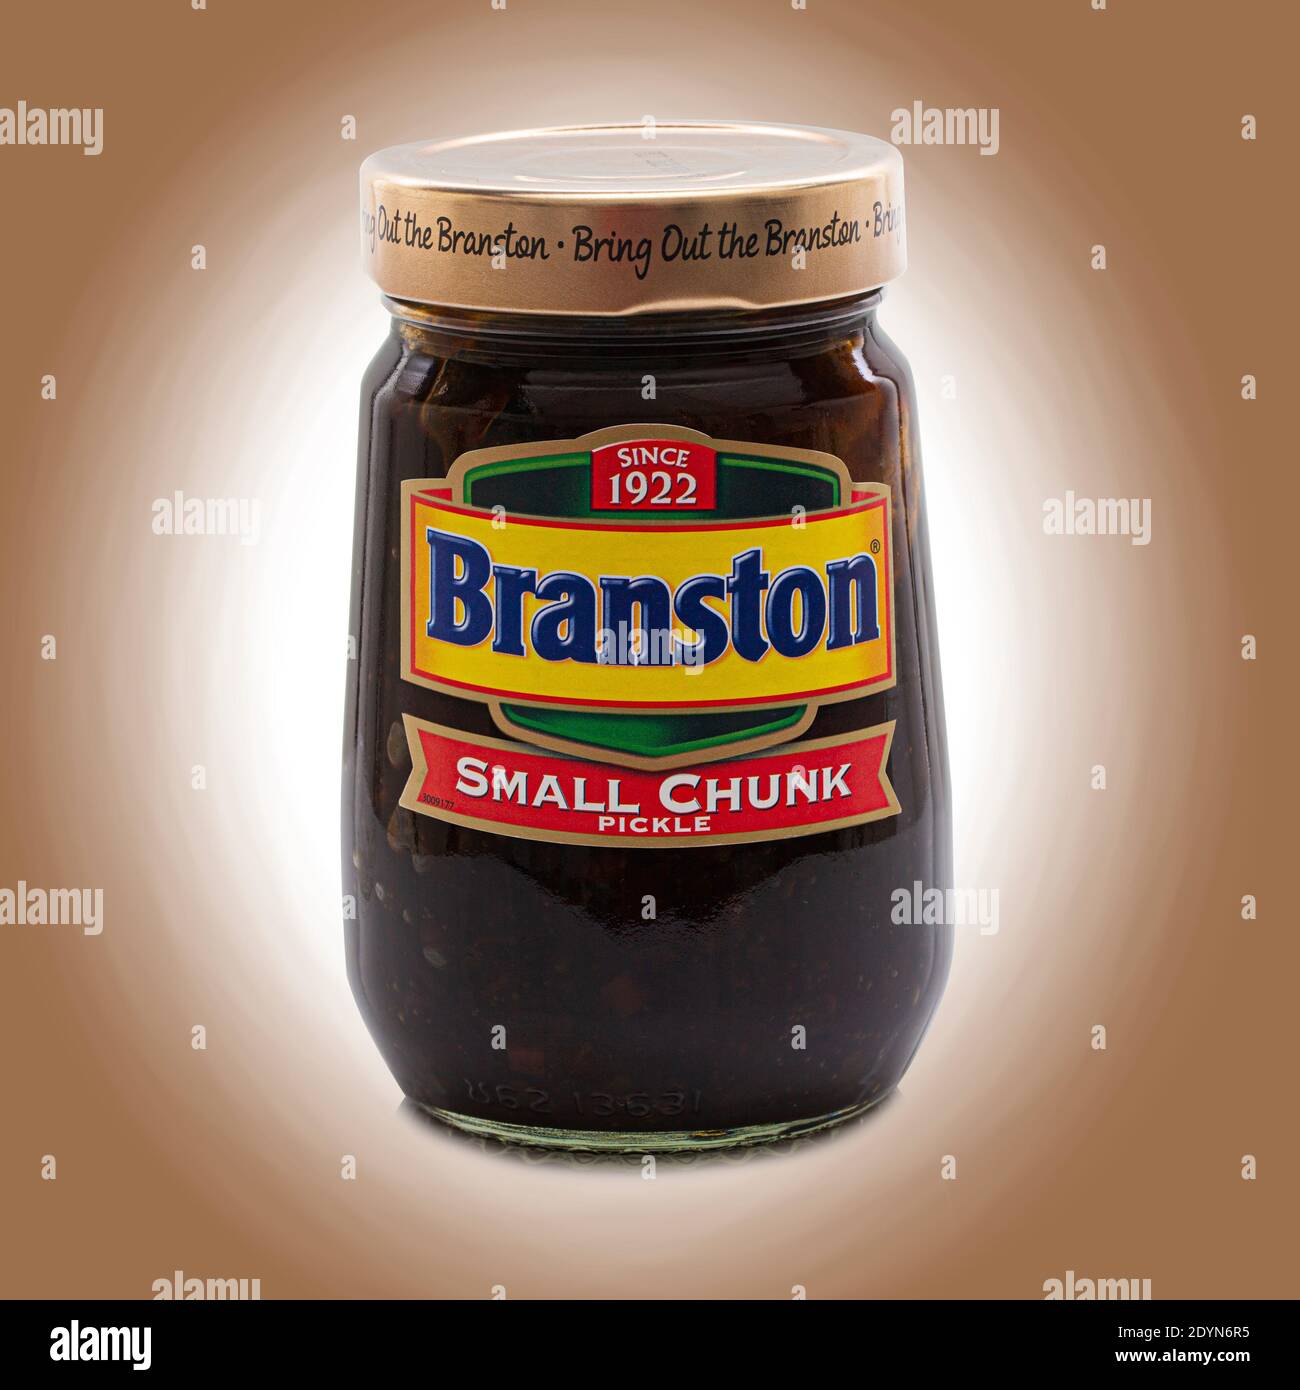 SWINDON, UK - DECEMBER 27, 2020:  Jar Of Branston Small Chunk Pickle - Bring out the Branston Since 1922, Stock Photo